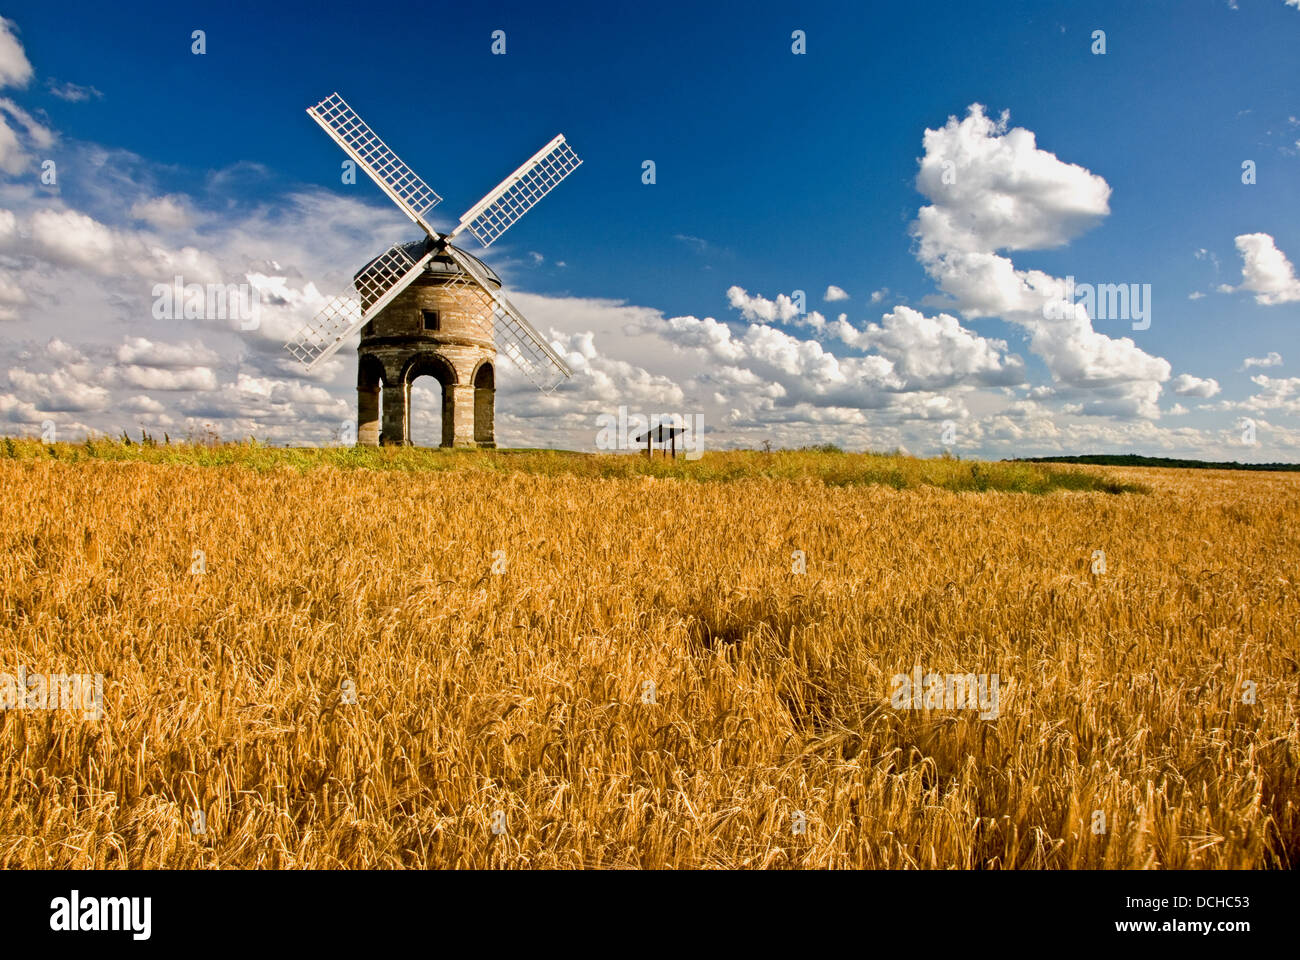 Chesterton Windmill is a landmark building in South Warwickshire seen with ripening wheat and cumulus clouds in a blue sky Stock Photo